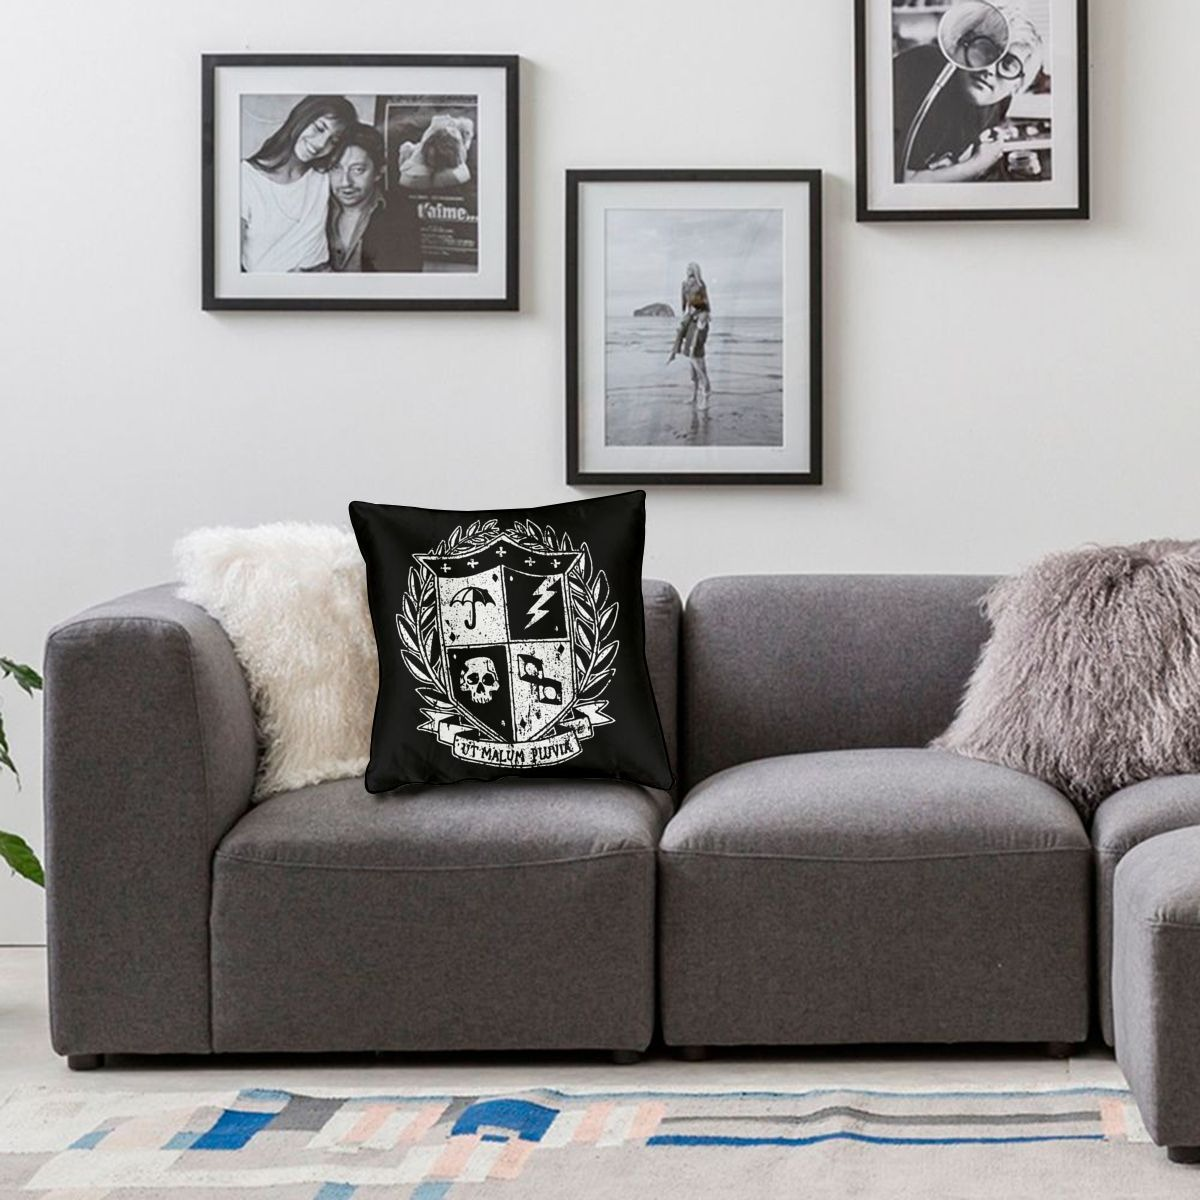 Unique Pillowcase Decorative with print of Umbrella Academy / Pillows with Double-sided Printing - HARD'N'HEAVY